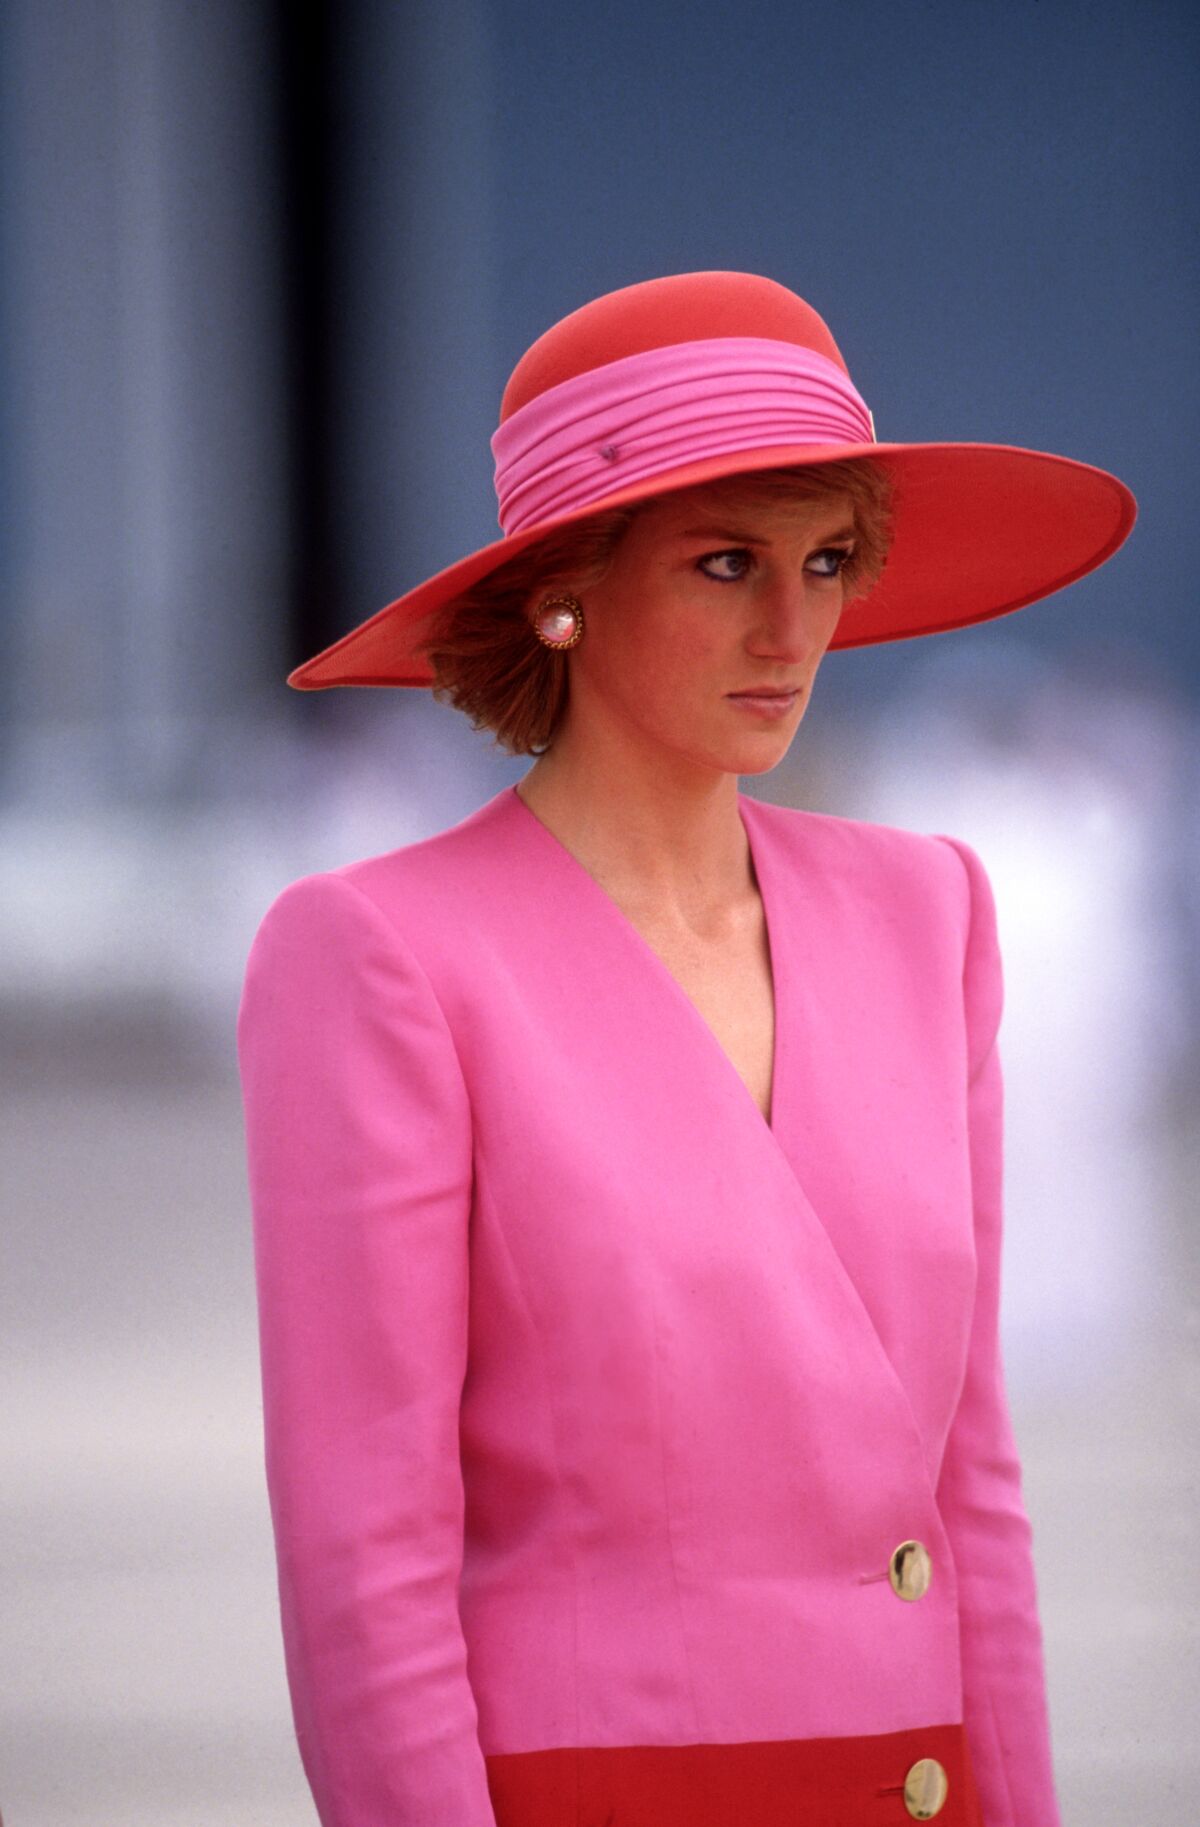 March 1989: Visiting Dubai, Diana Princess of Wales wears a color-blocked pink and red dress by Catherine Walker.